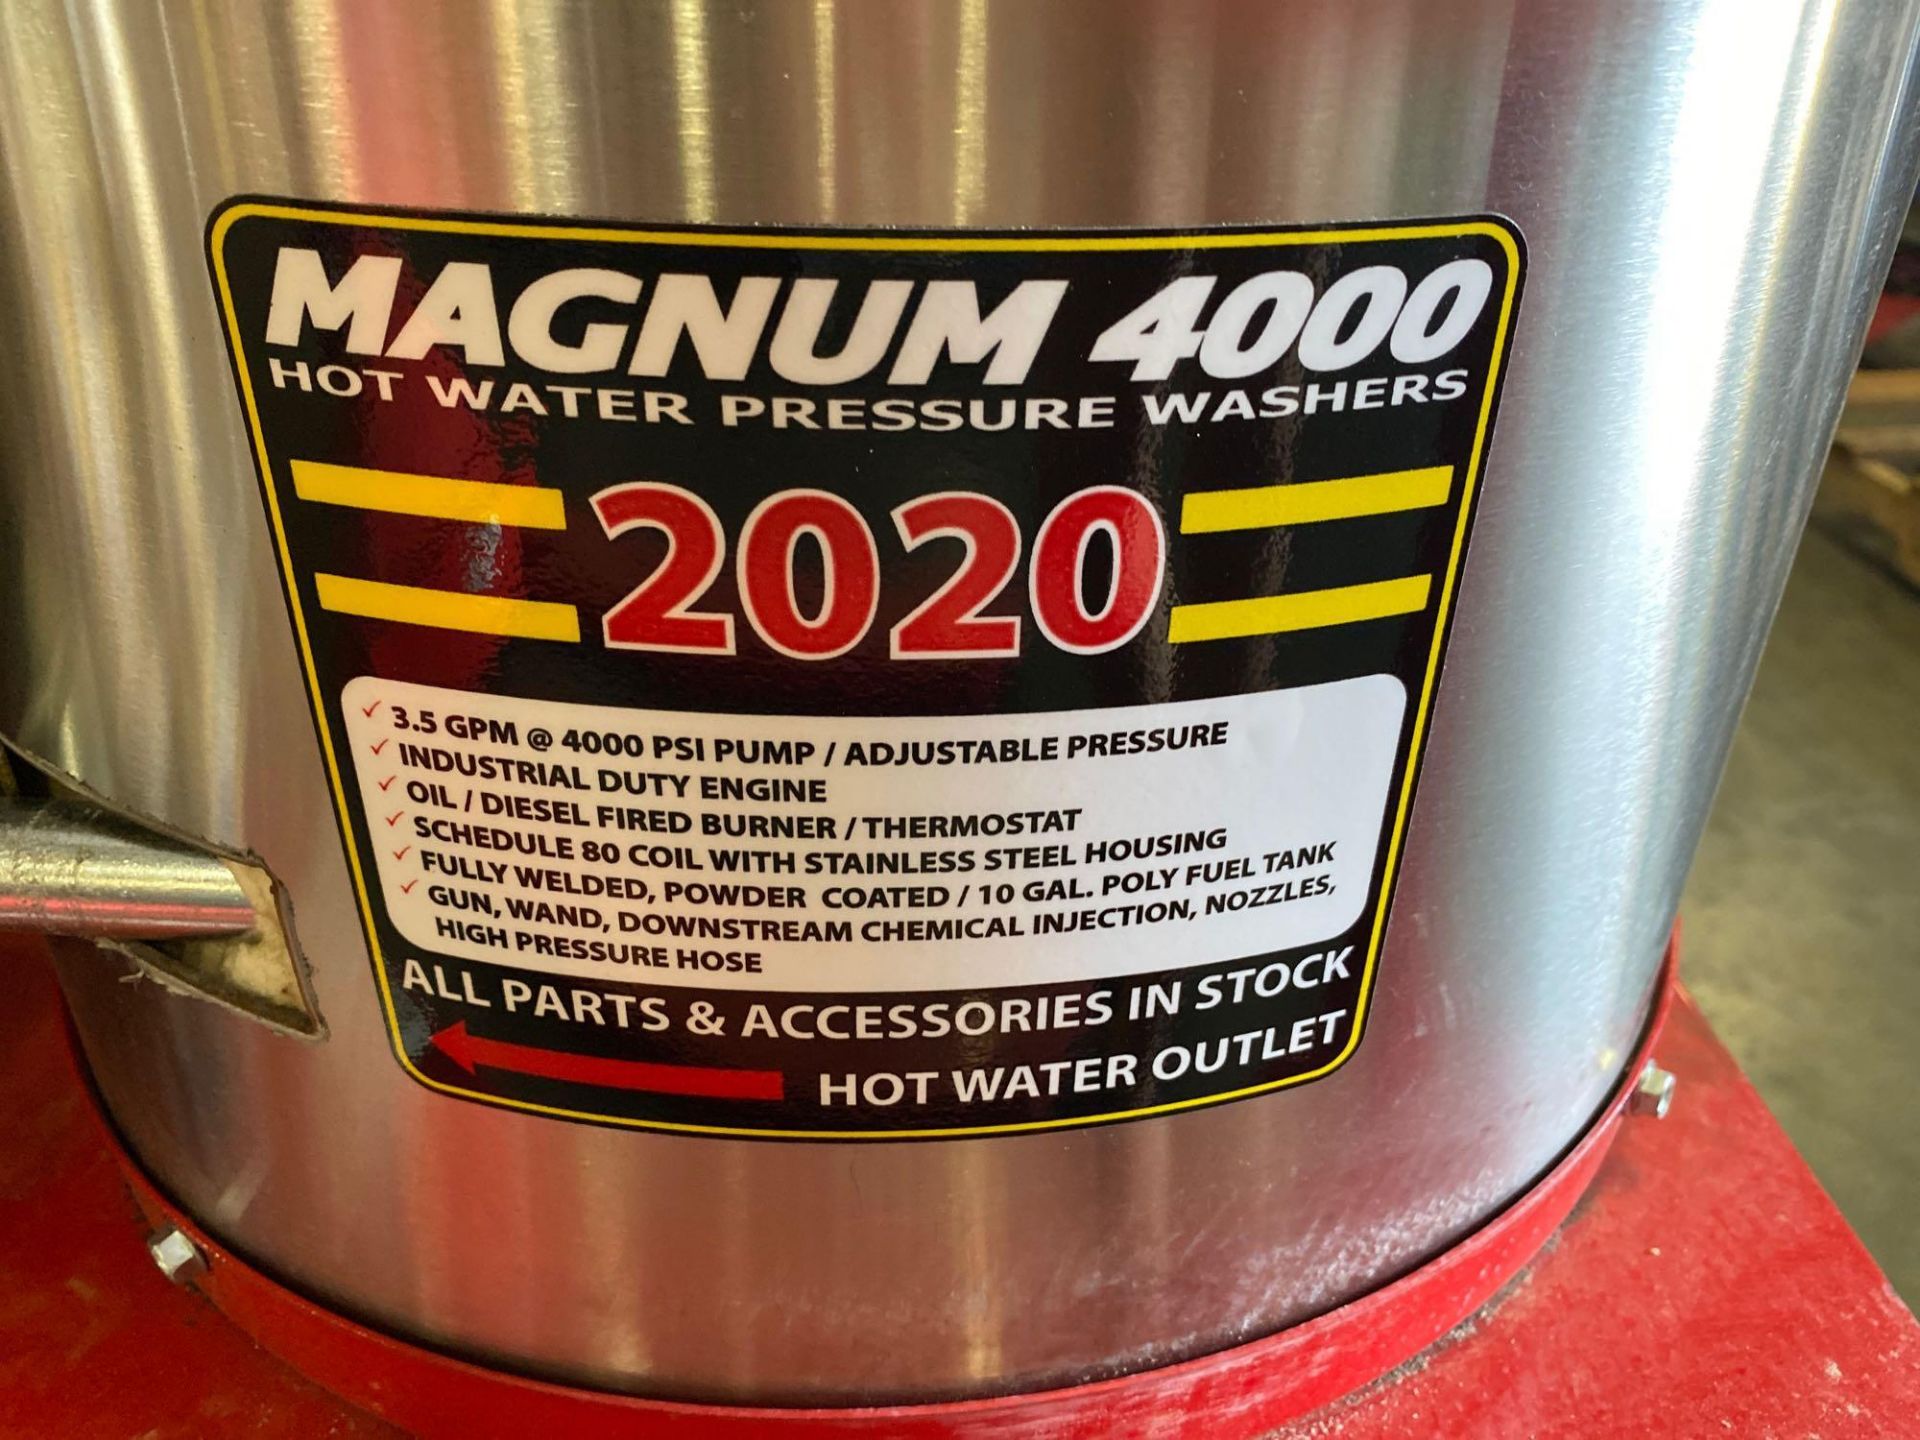 NEW/UNUSED 2020 MAGNUM 4000 HEATED PRESSURE WASHER, ELECTRIC START - Image 6 of 6